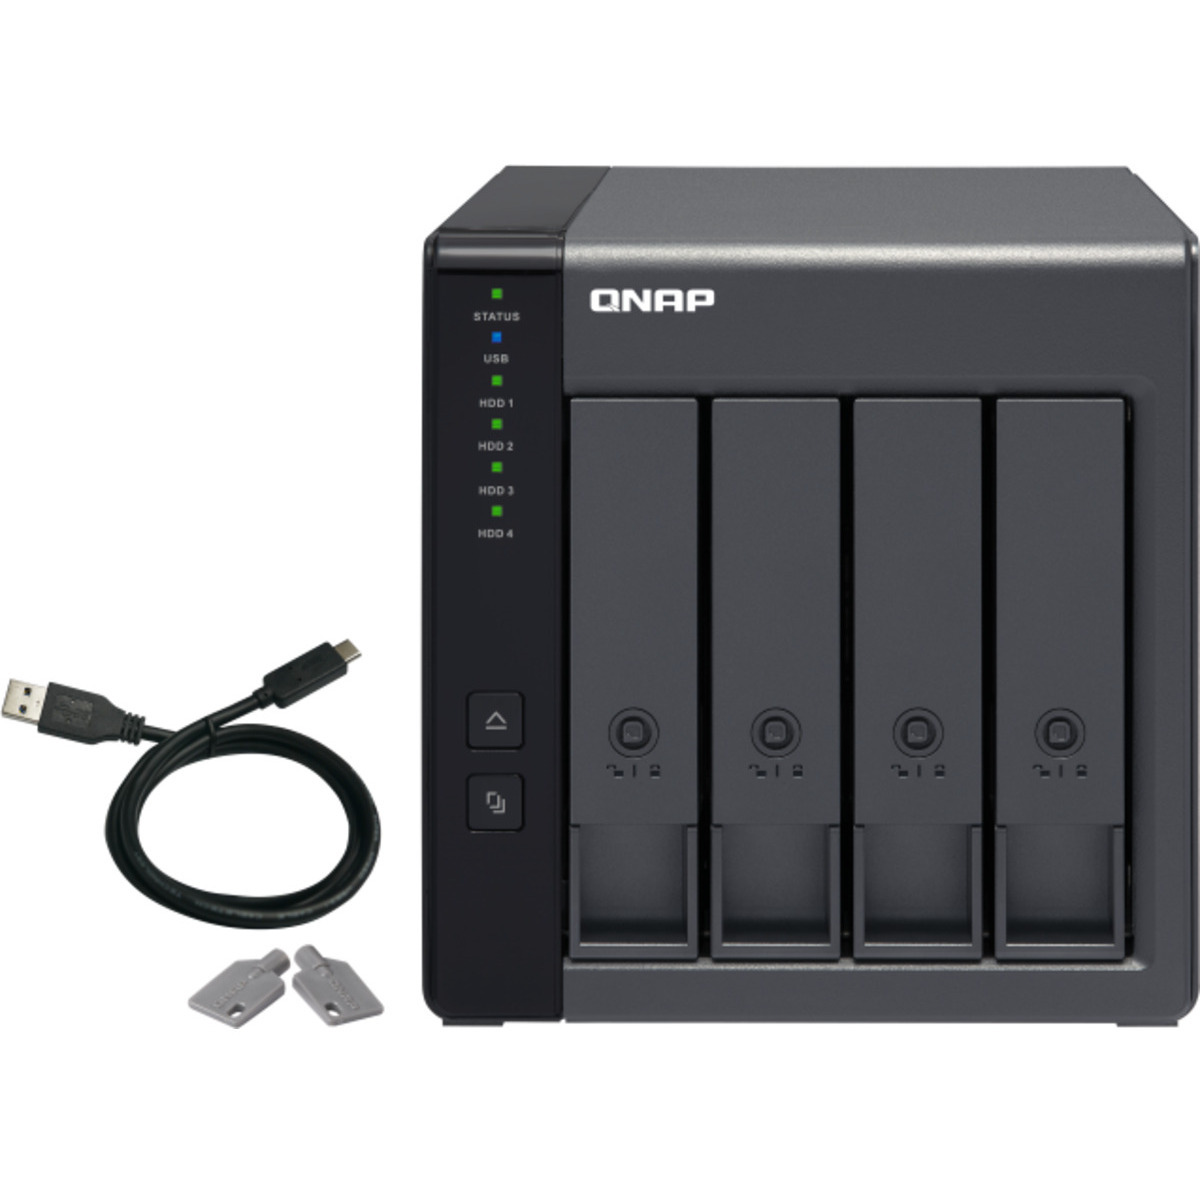 buy QNAP TR-004 External Expansion Drive 96tb Desktop Expansion Enclosure 4x24000gb Western Digital Ultrastar HC580 WUH722424ALE6L4 3.5 7200rpm SATA 6Gb/s HDD ENTERPRISE Class Drives Installed - Burn-In Tested - nas headquarters buy network attached storage server device das new raid-5 free shipping usa spring sale TR-004 External Expansion Drive